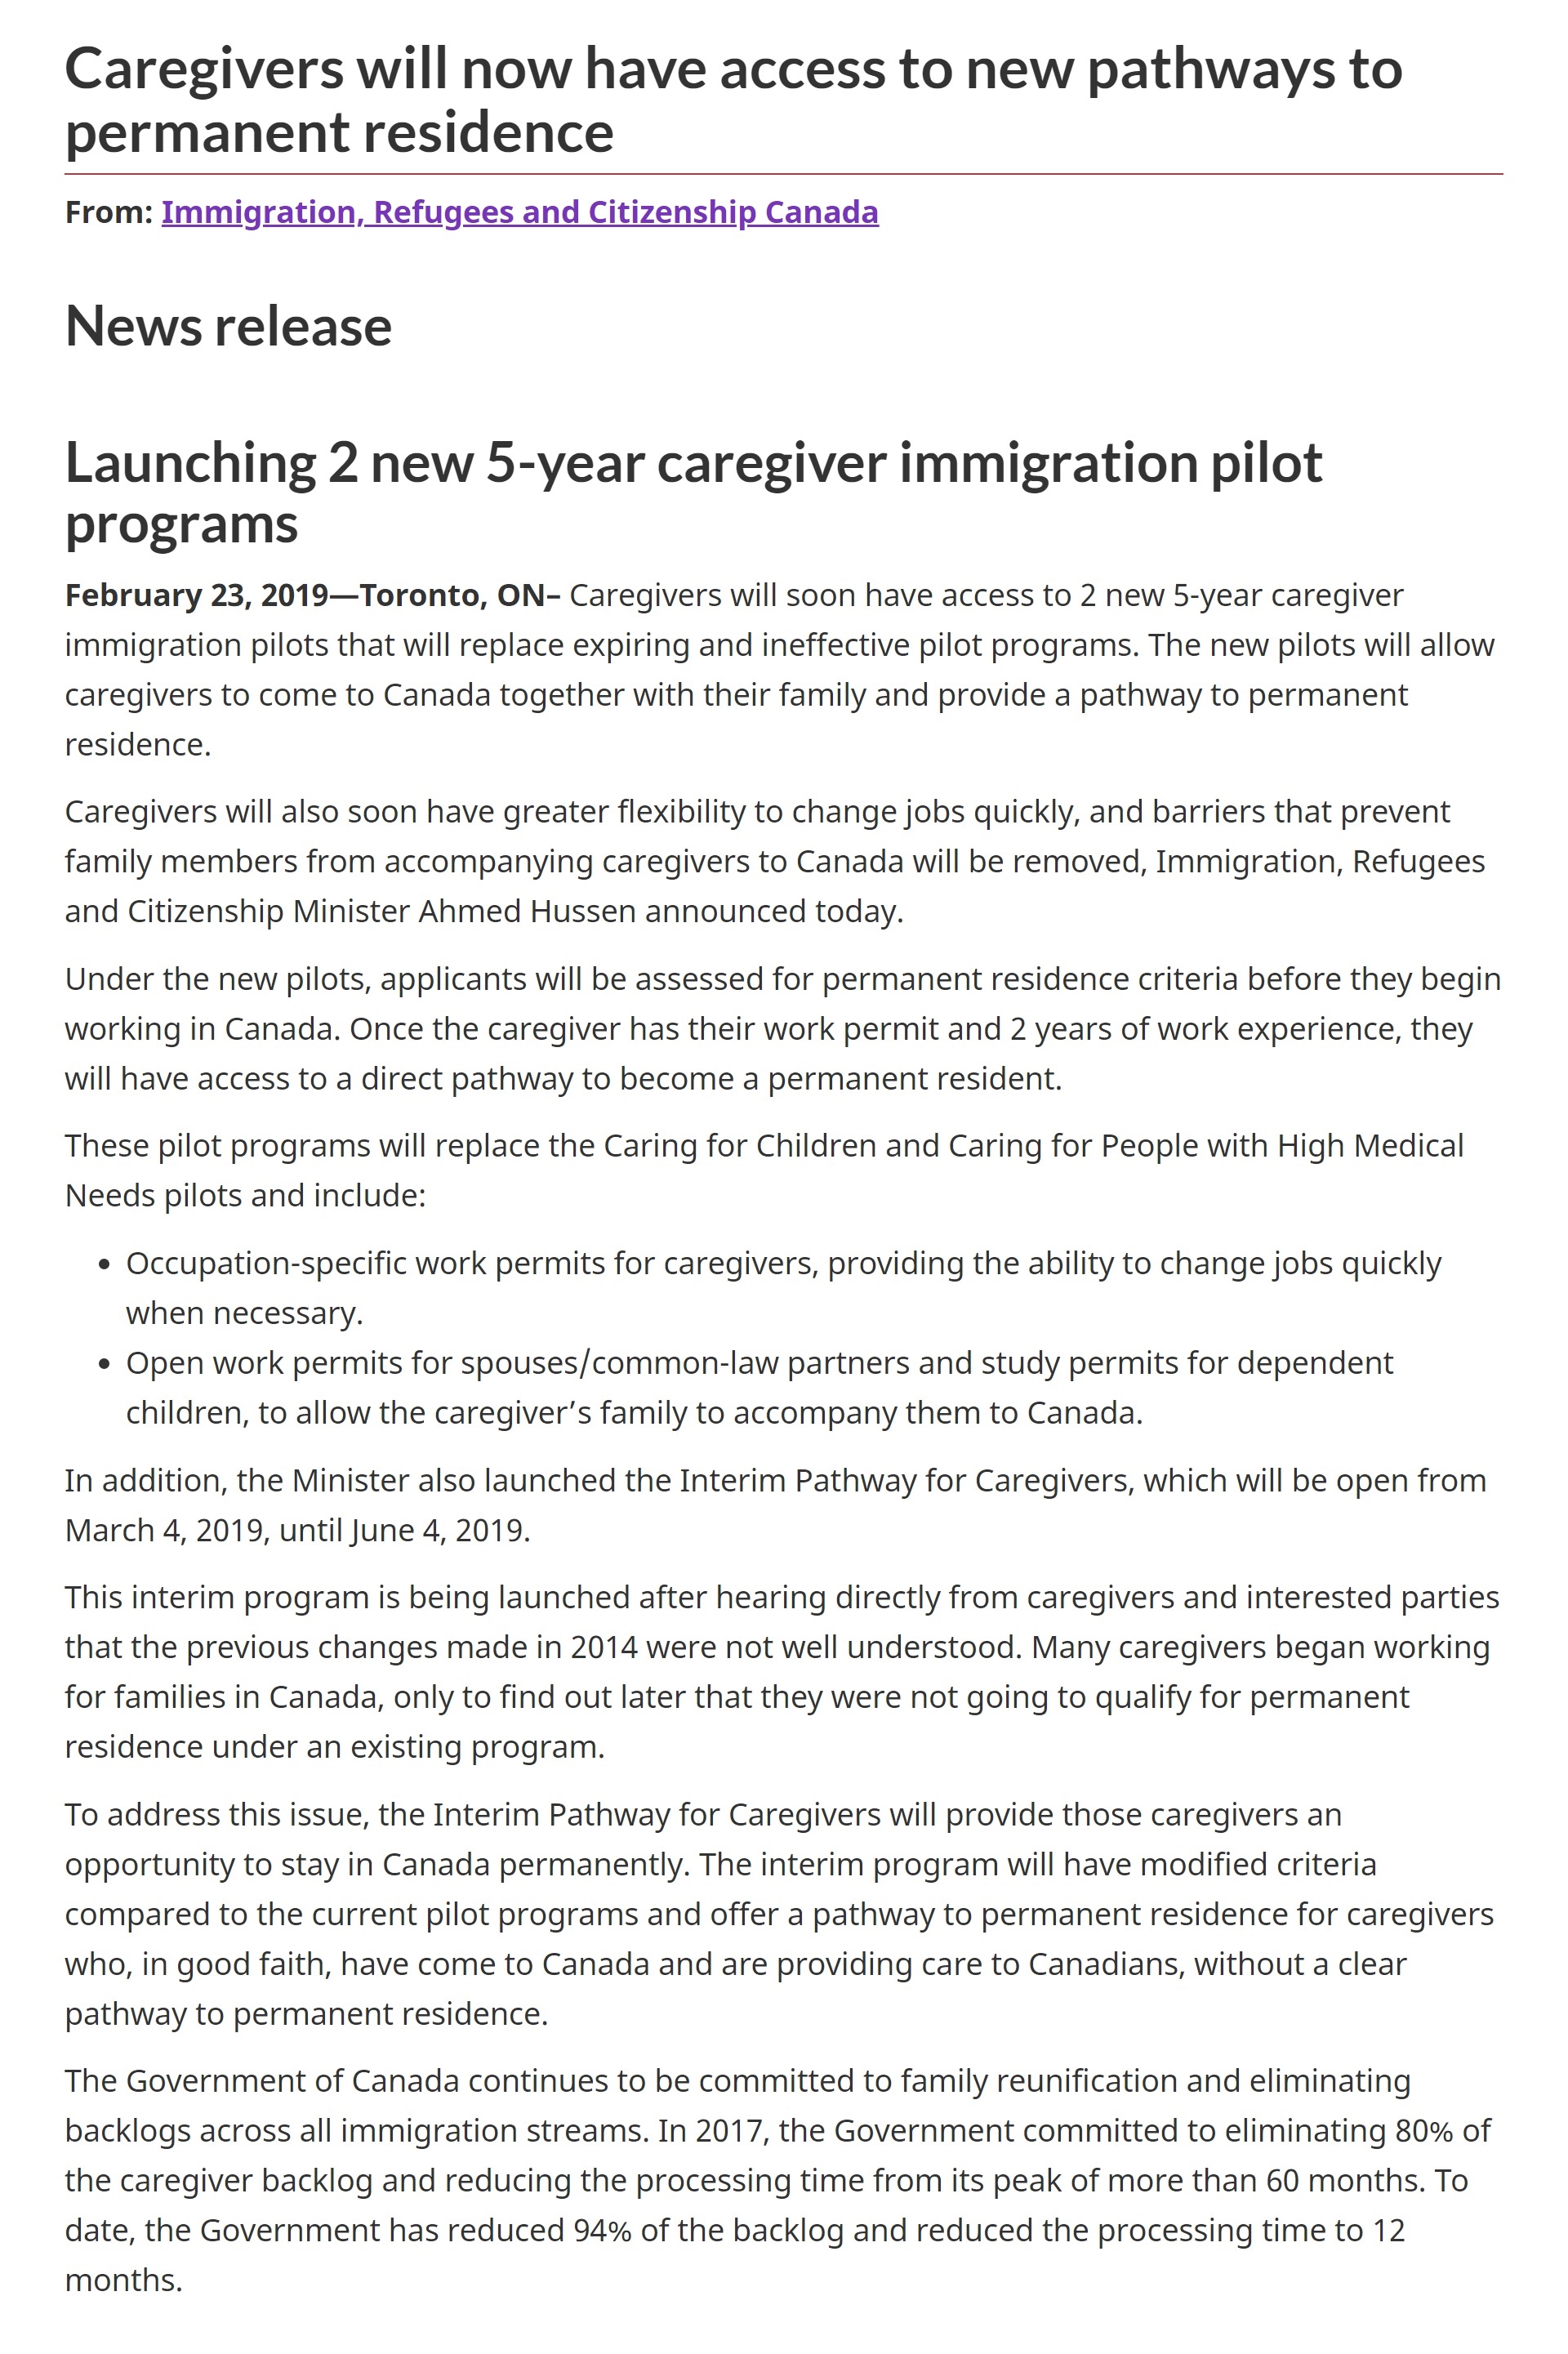 caregivers-new-pathways-to-permanent-residenccaregivers-new-pathways-to-permanent-residence-2019-02-27-09_01e-2019-02-27-09_01